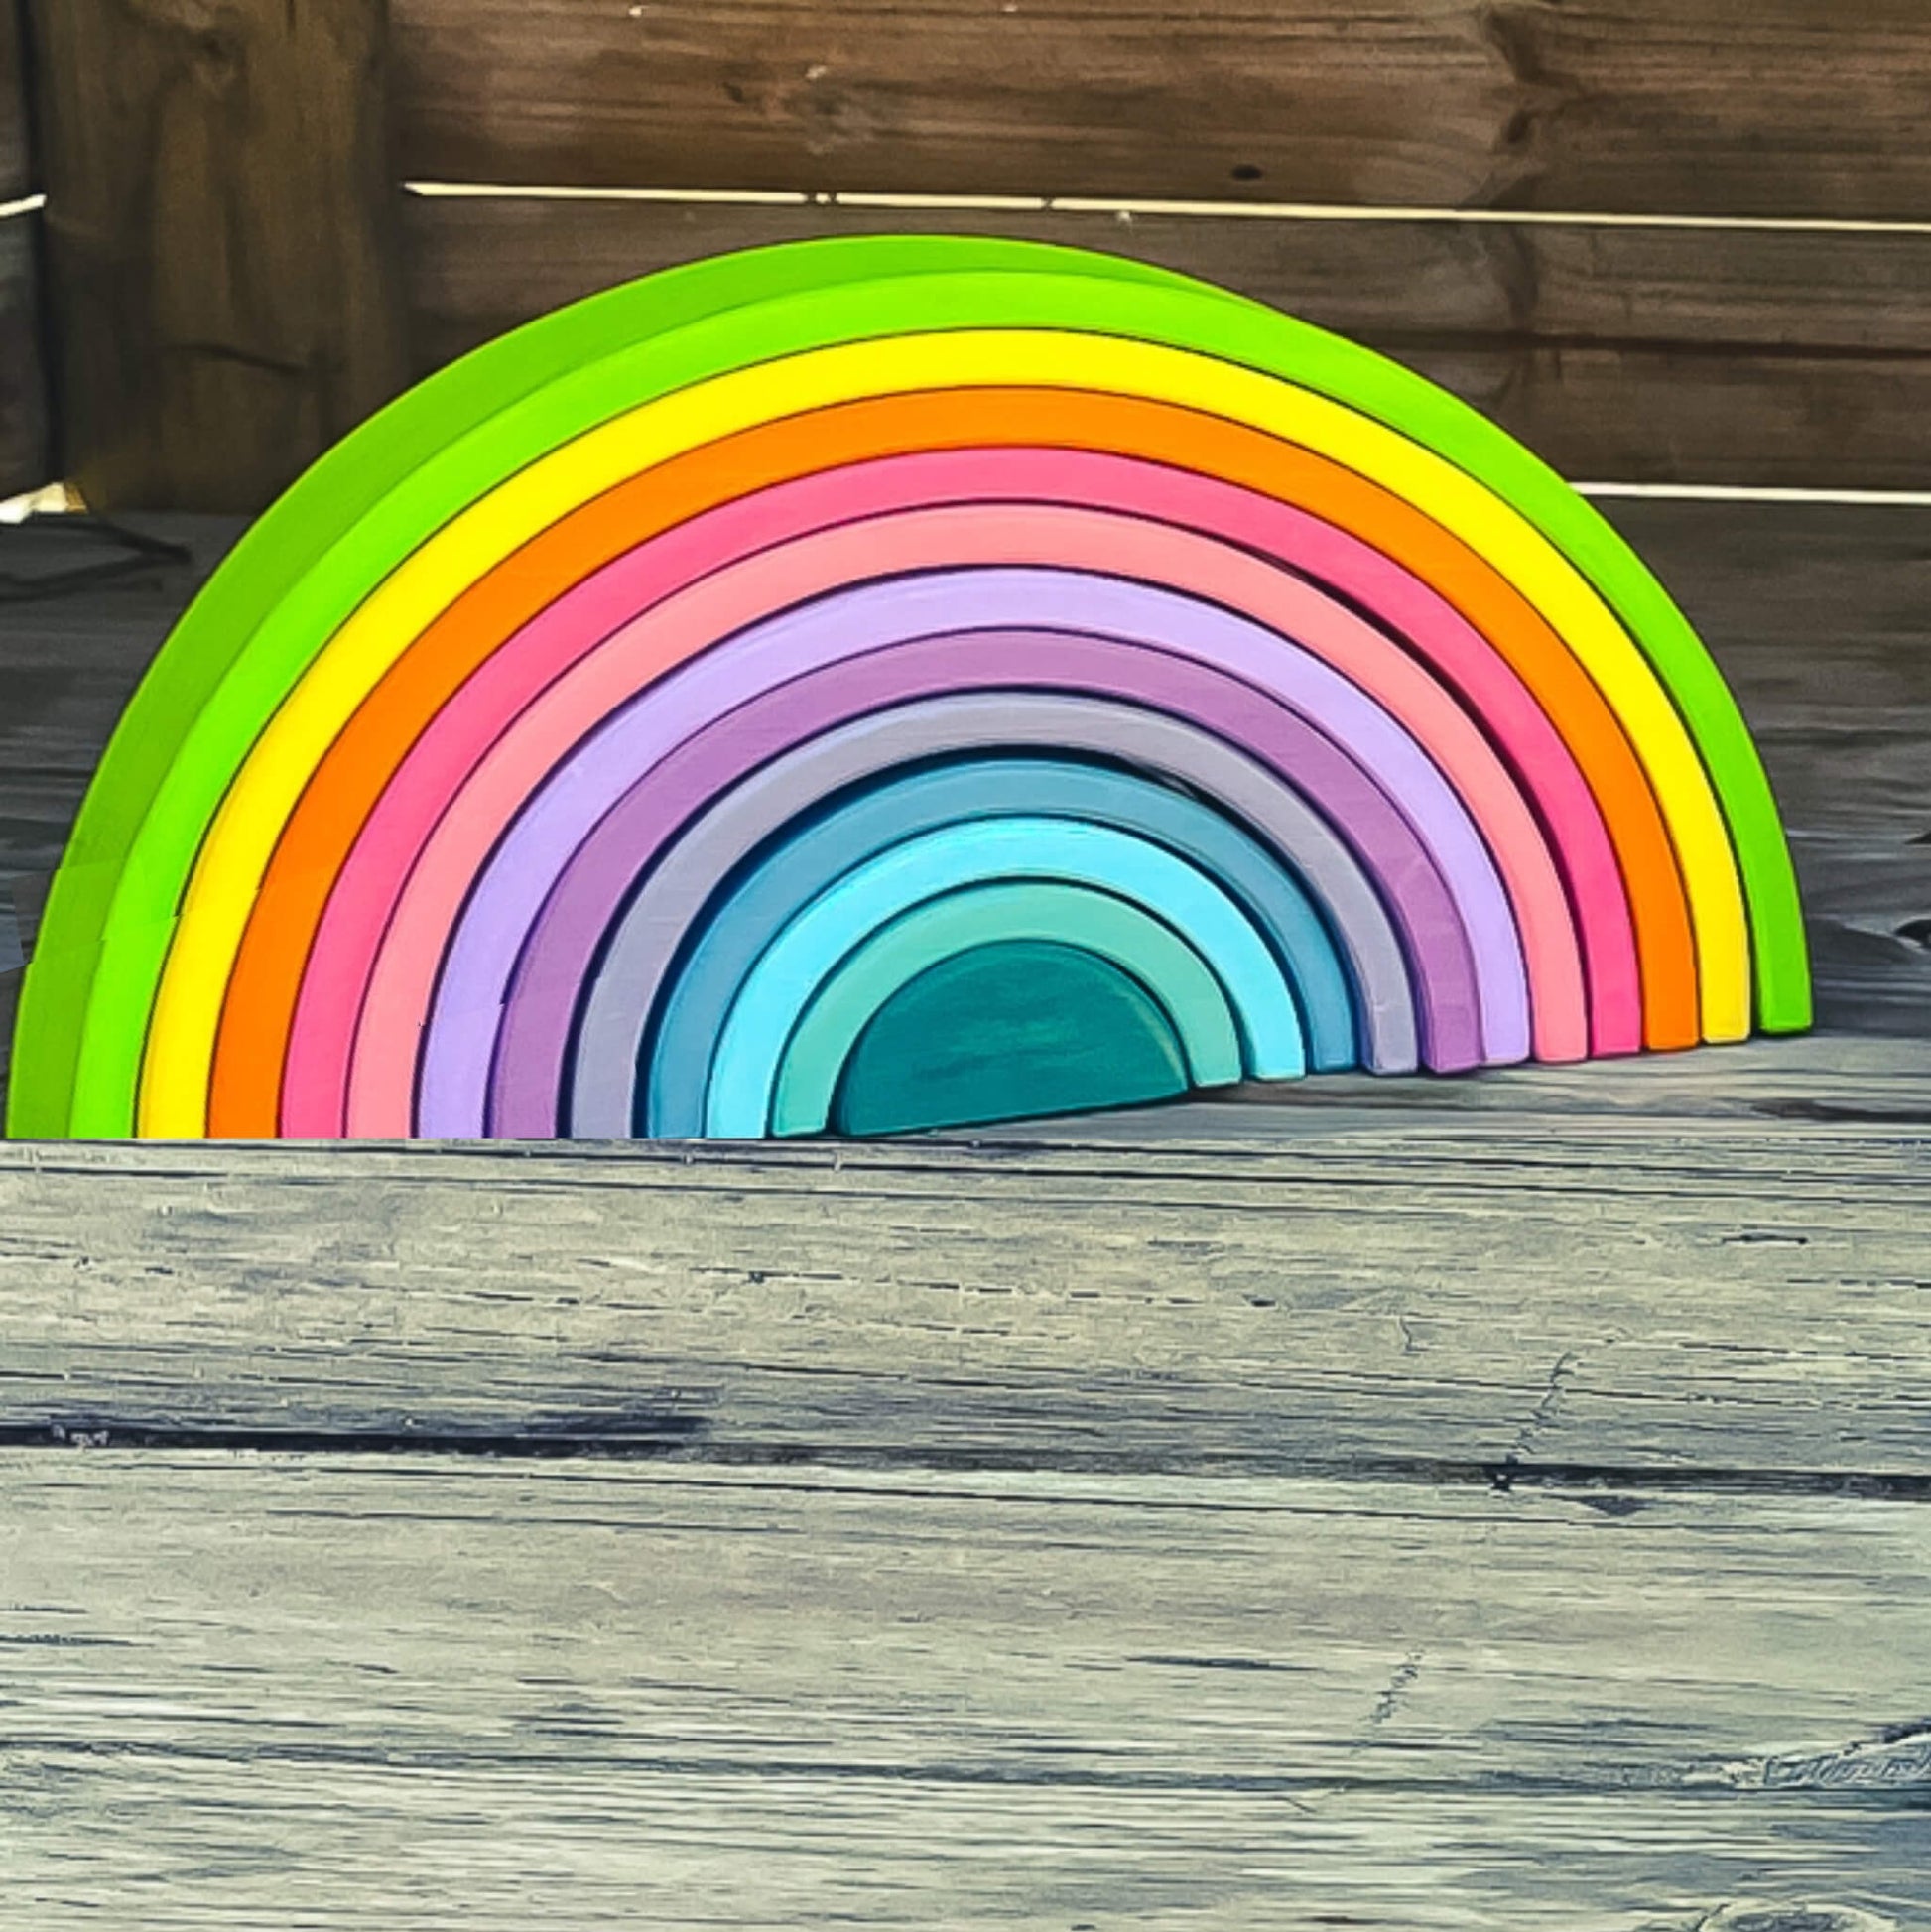 An image showing a front view of a pastel rainbow arch Montessori toy. The toy is made up of wooden arched blocks in various pastel colors, arranged in a curved formation. The Montessori toy promotes open-ended play and encourages color recognition and fine motor skills development.